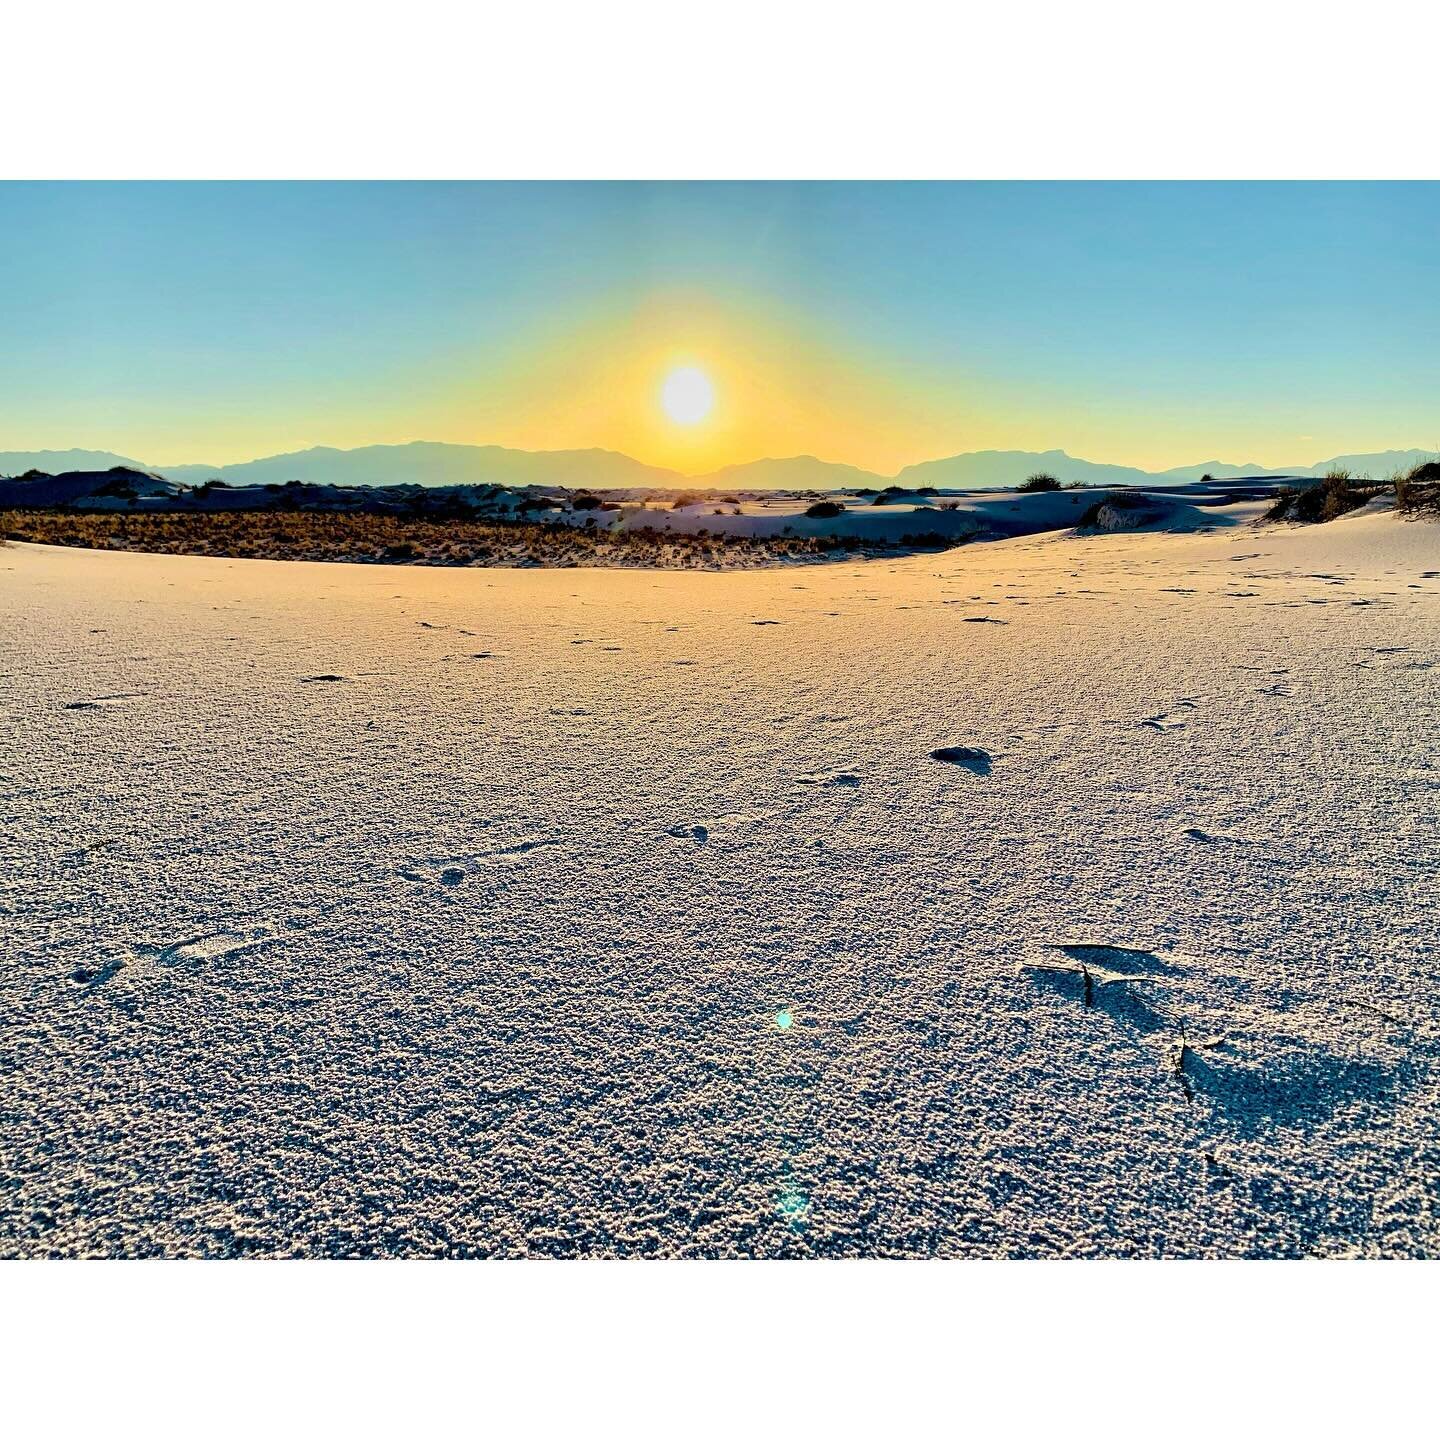 The fleeting spectacle of a White Sands sunset. Every second the light transforms. Fiery oranges lead to soft pinks, while long shadows stretch across the endless white. The purity of the dunes symbolize new beginnings and a connection to the spirit 